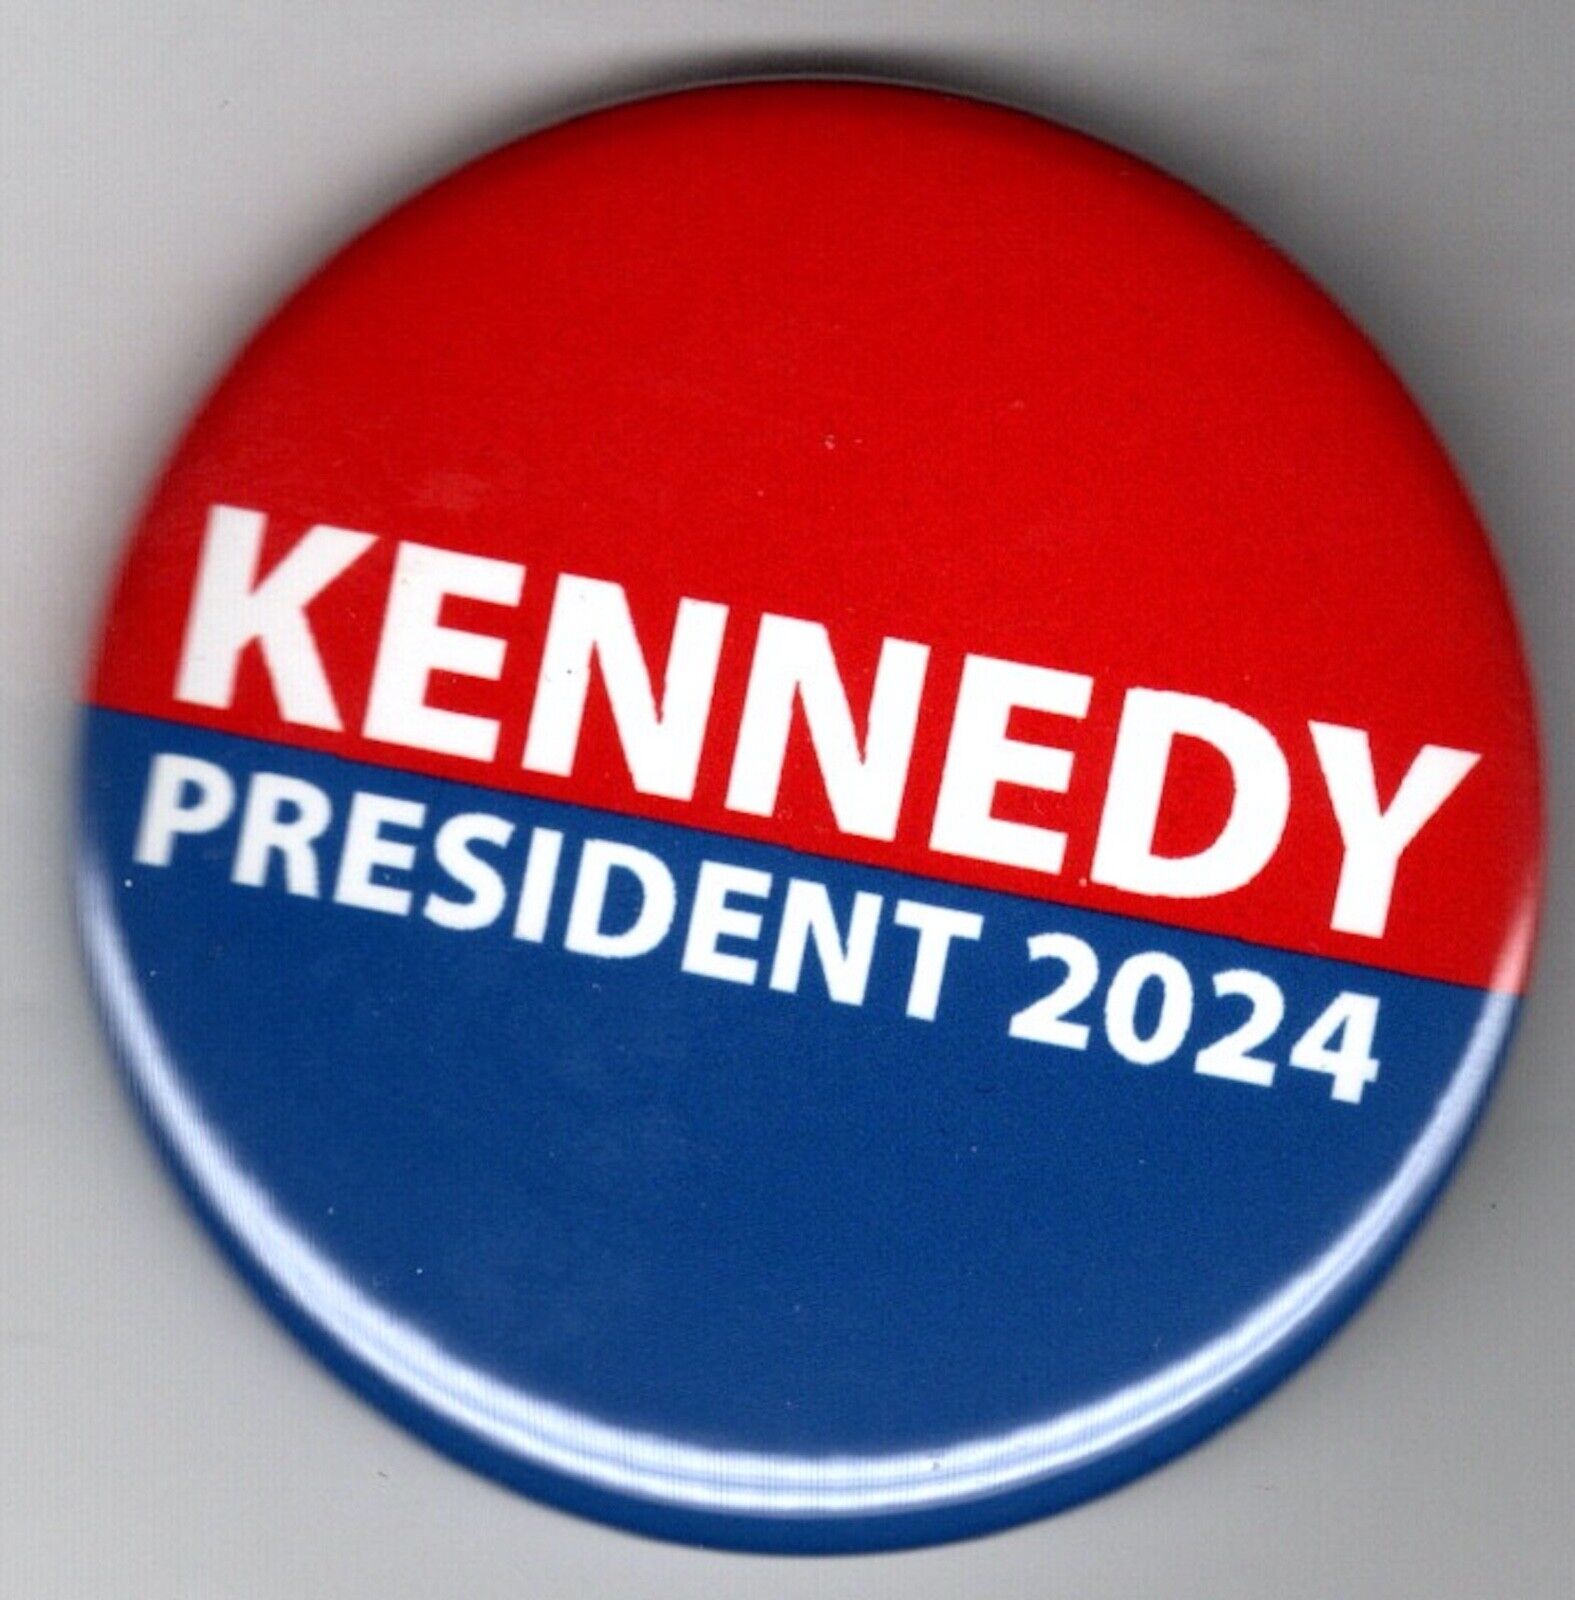 Robert Kennedy Jr President 2024 political campaign button for Sale